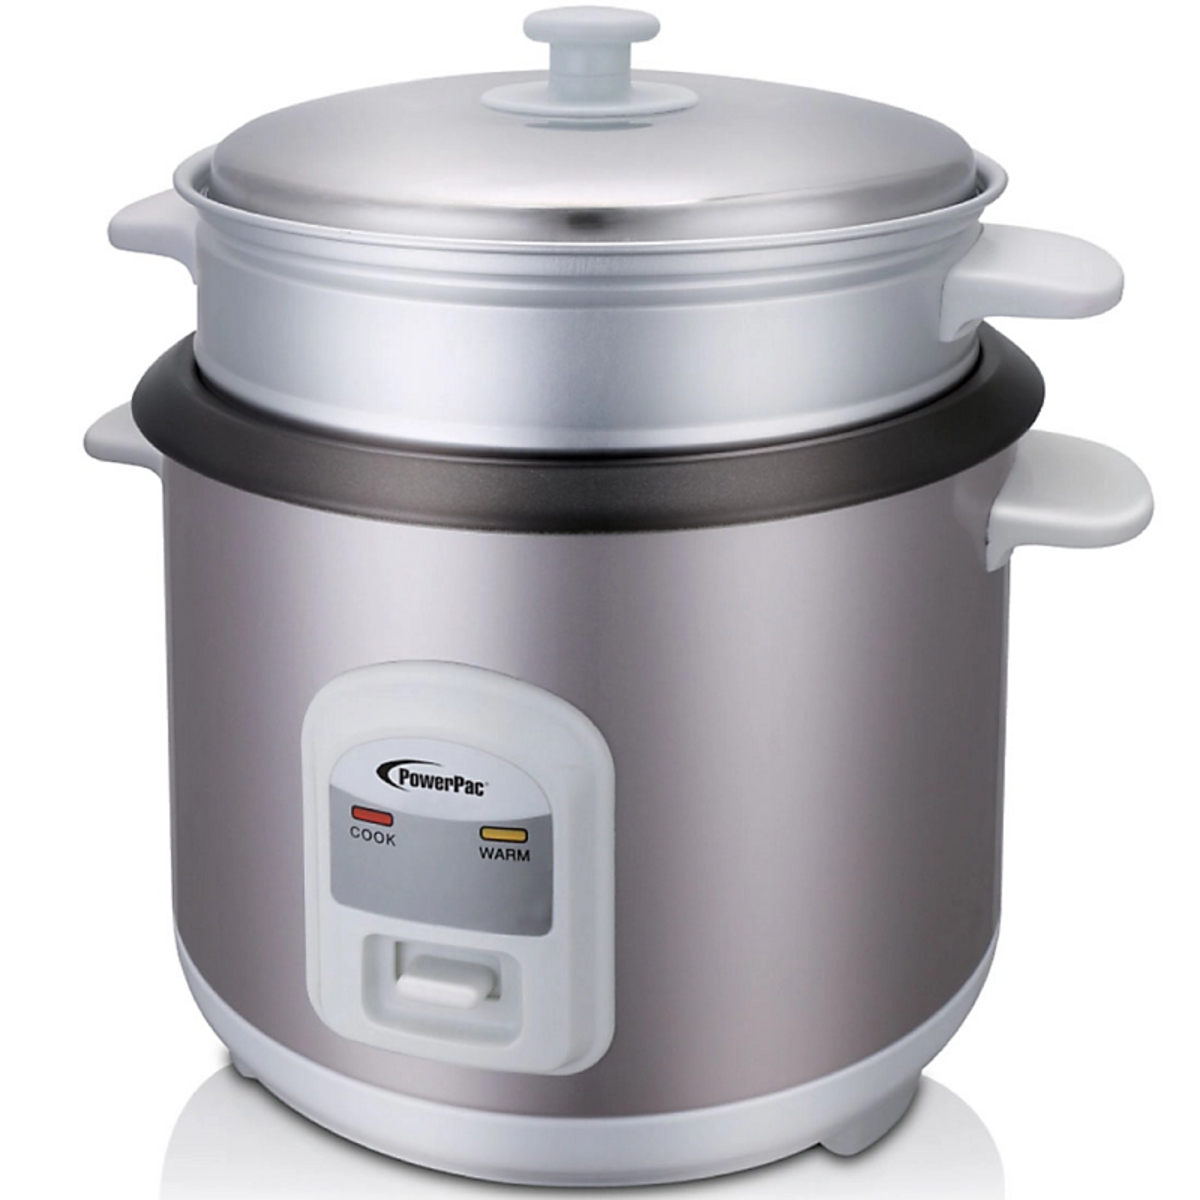 How Many People Can You Feed With A 1L Rice Cooker